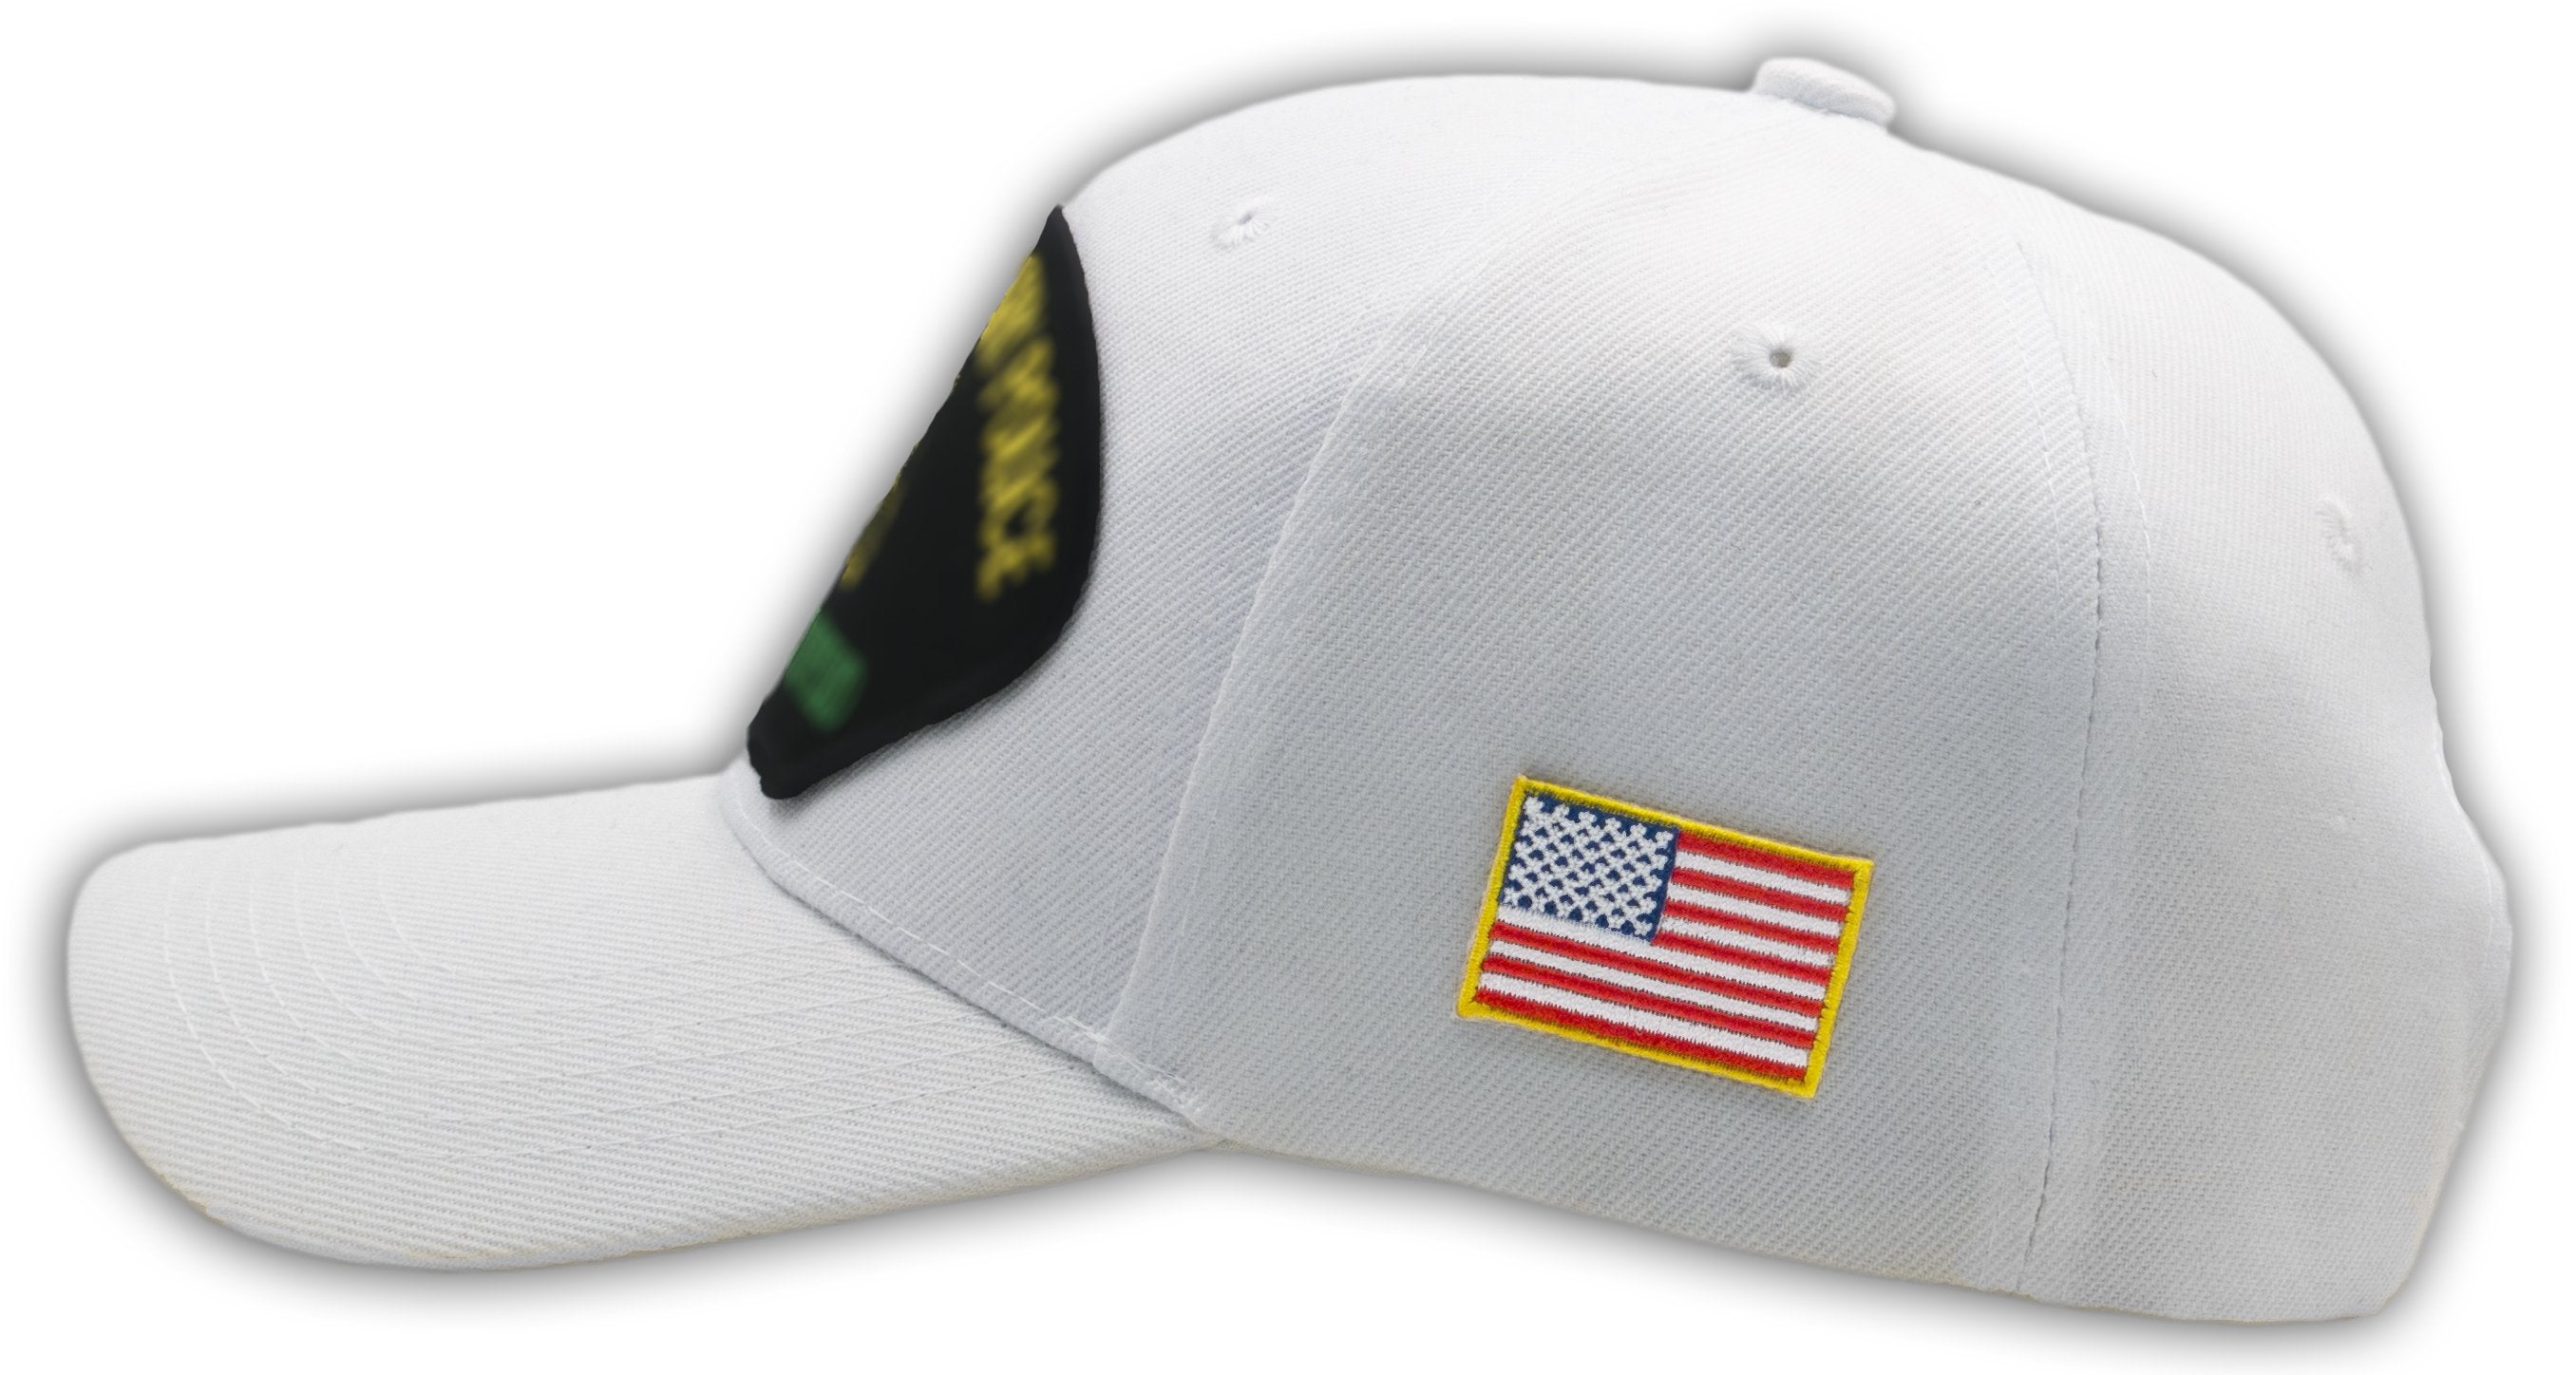 US Air Force Veteran Hat - Multiple Colors Available